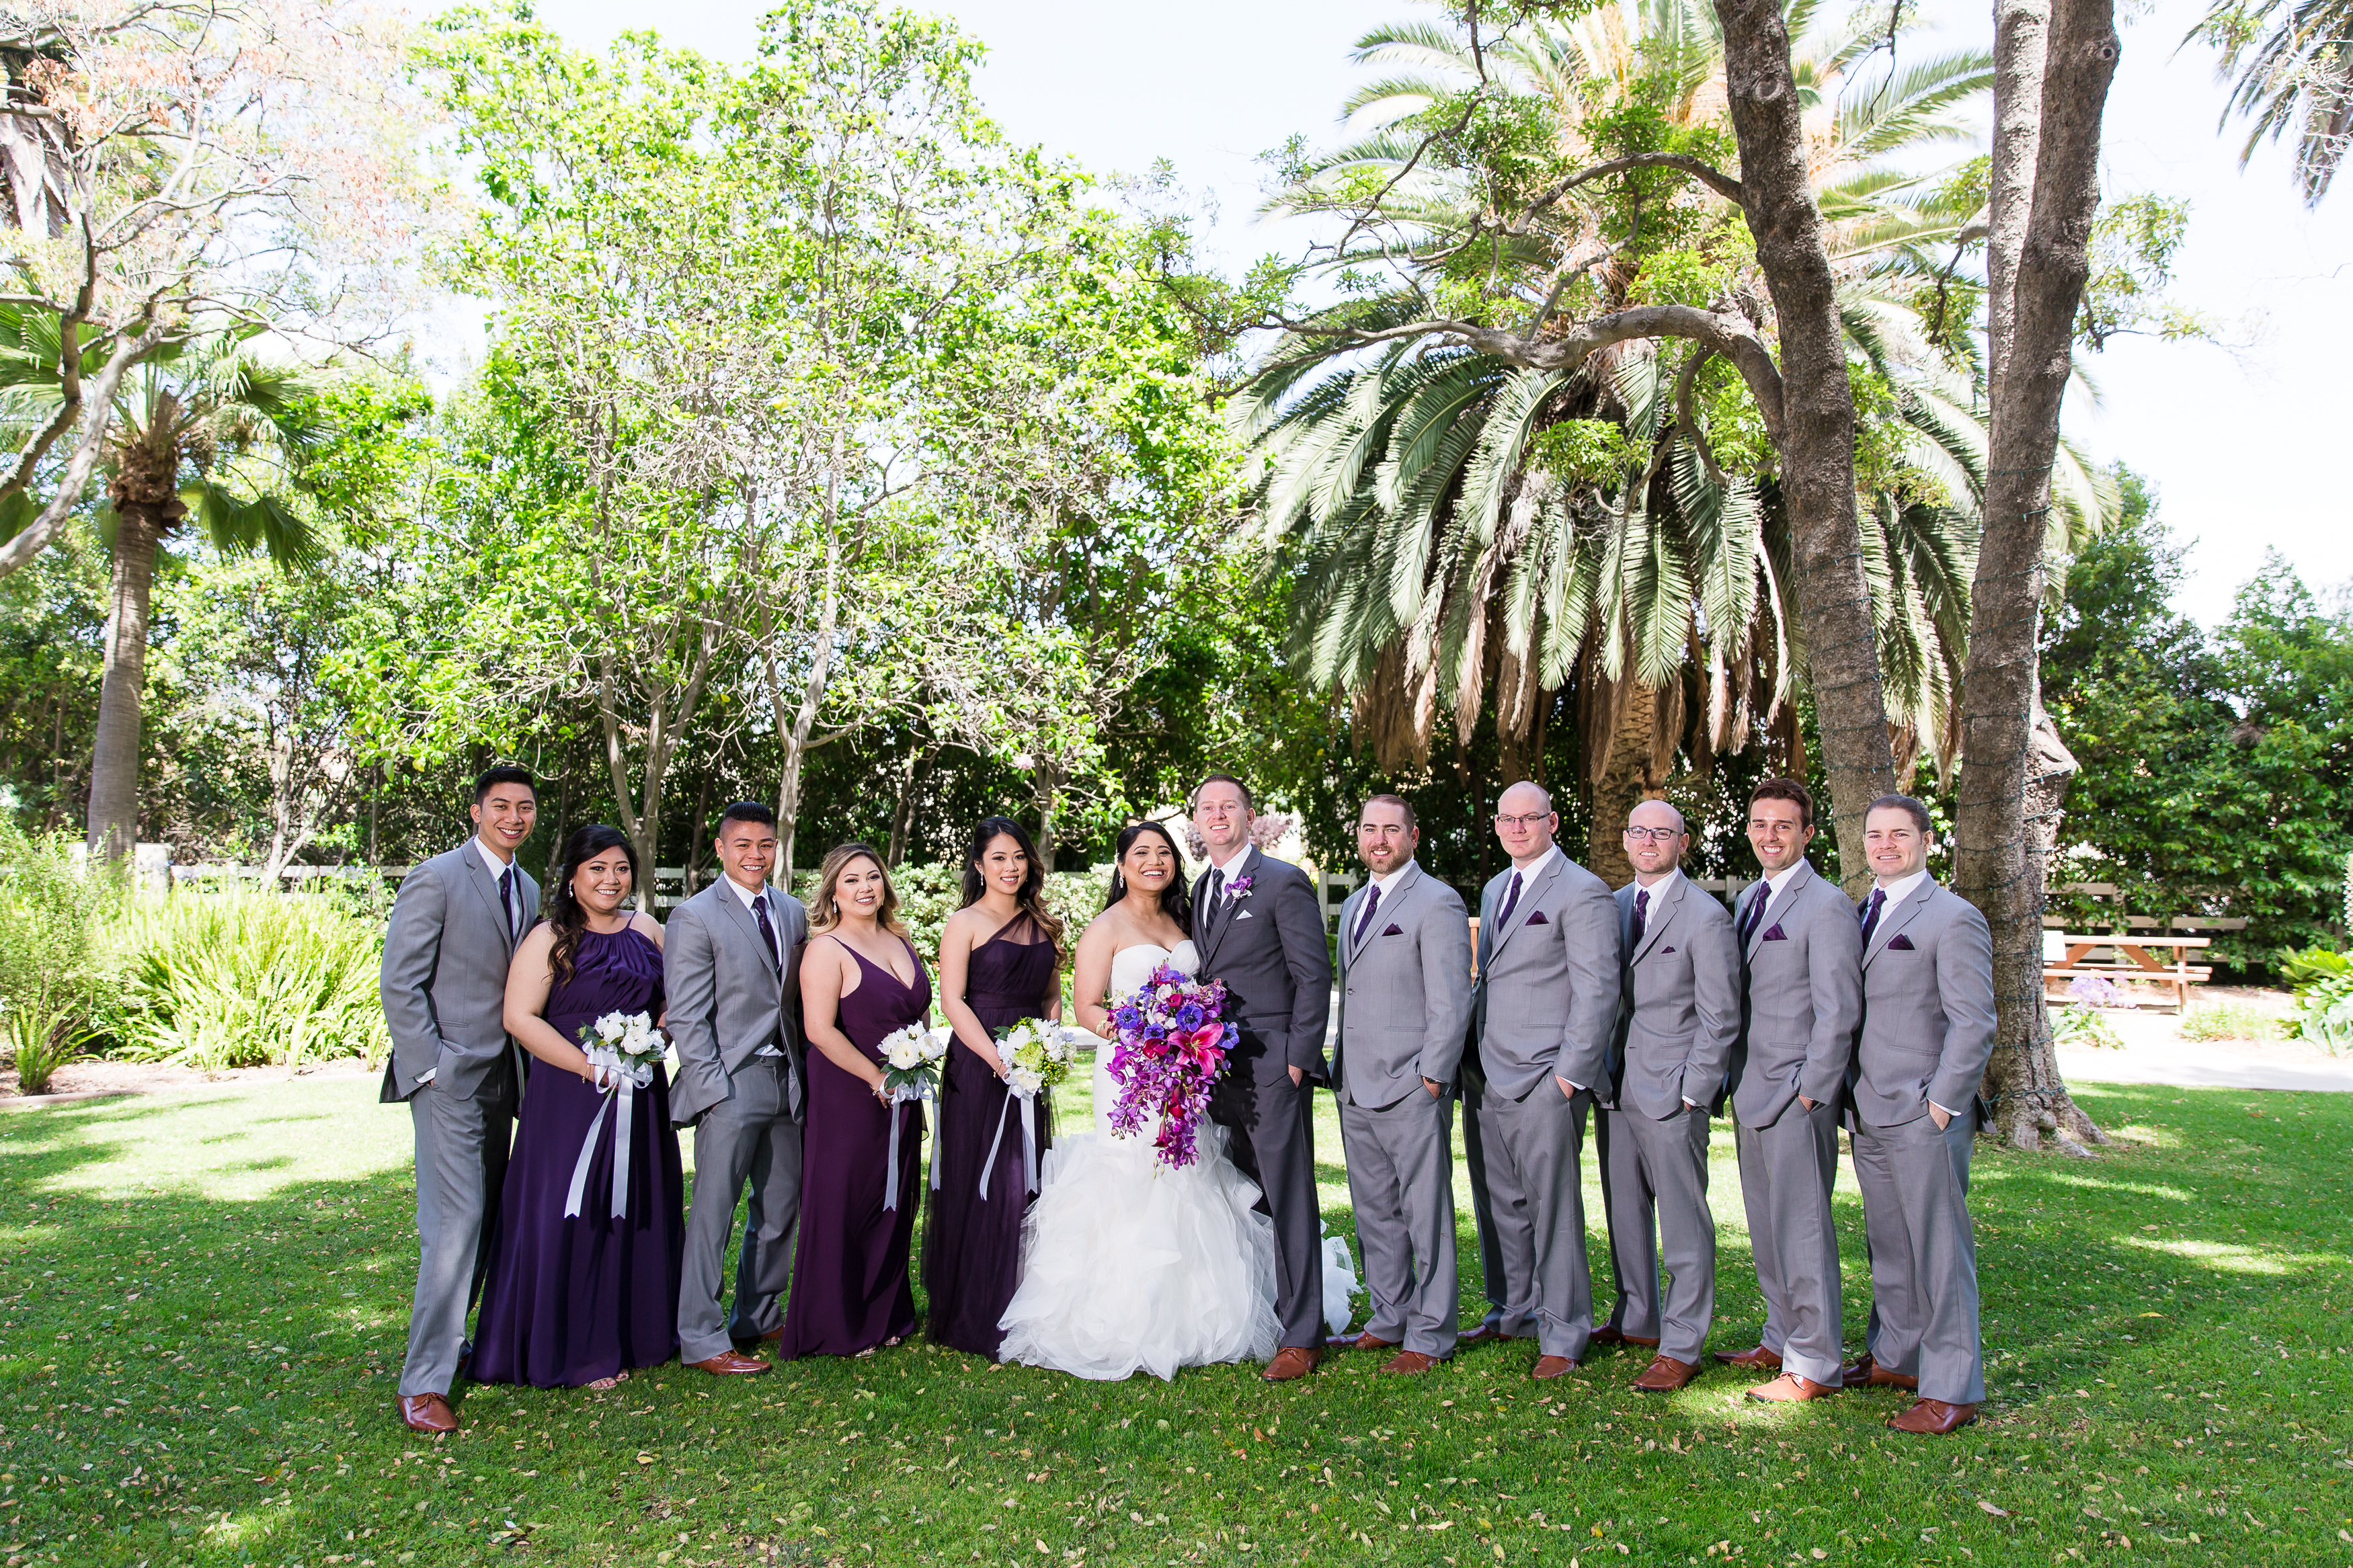 Wedding party on lawn at Camarillo Ranch House